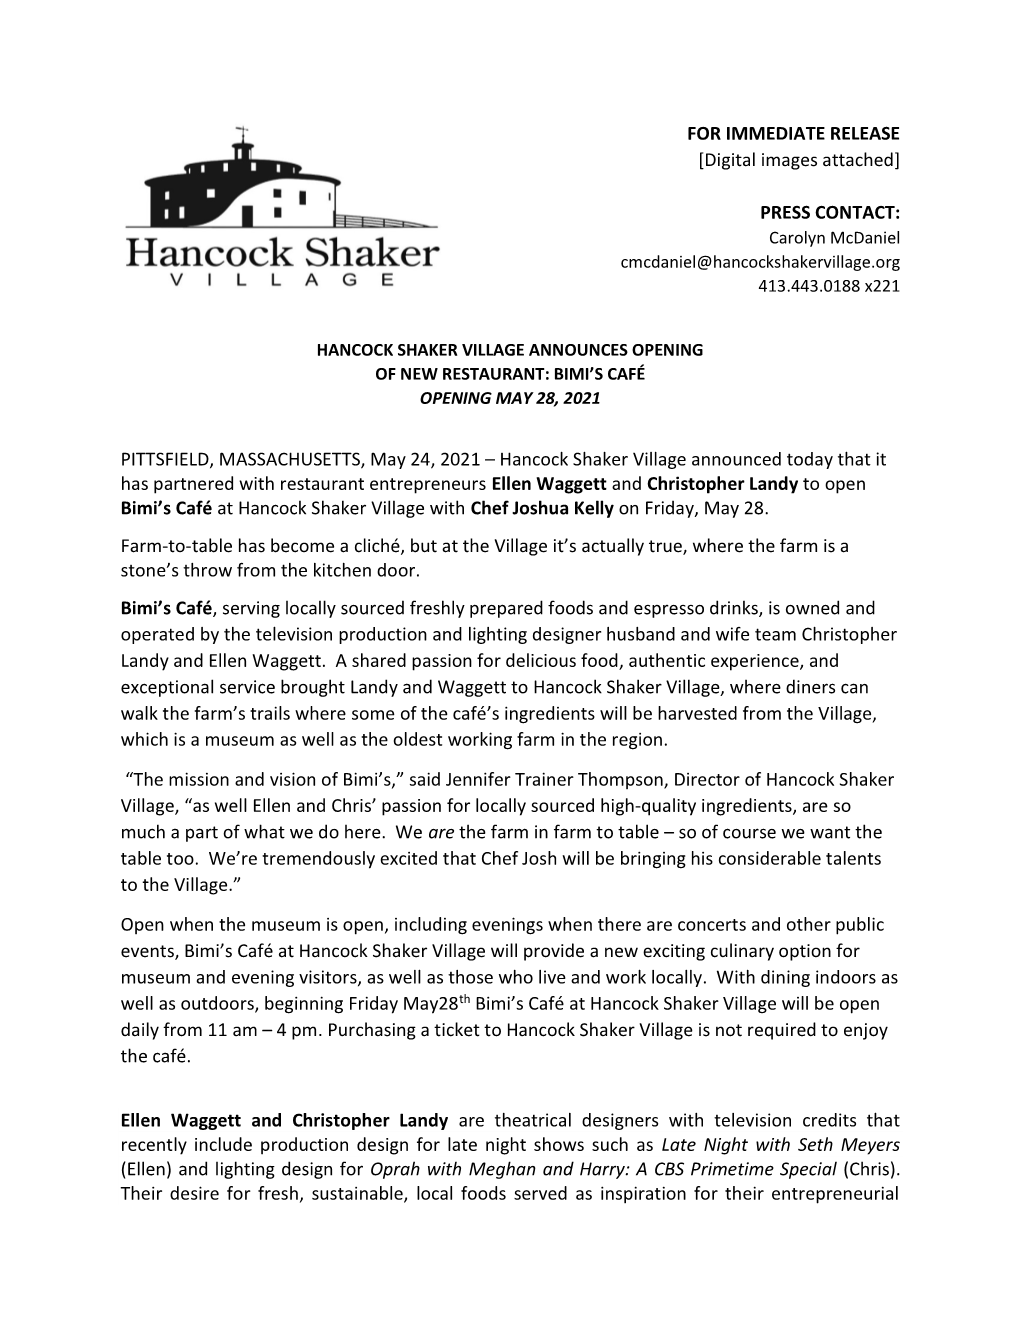 FOR IMMEDIATE RELEASE [Digital Images Attached] PRESS CONTACT: PITTSFIELD, MASSACHUSETTS, May 24, 2021 – Hancock Shaker Villag